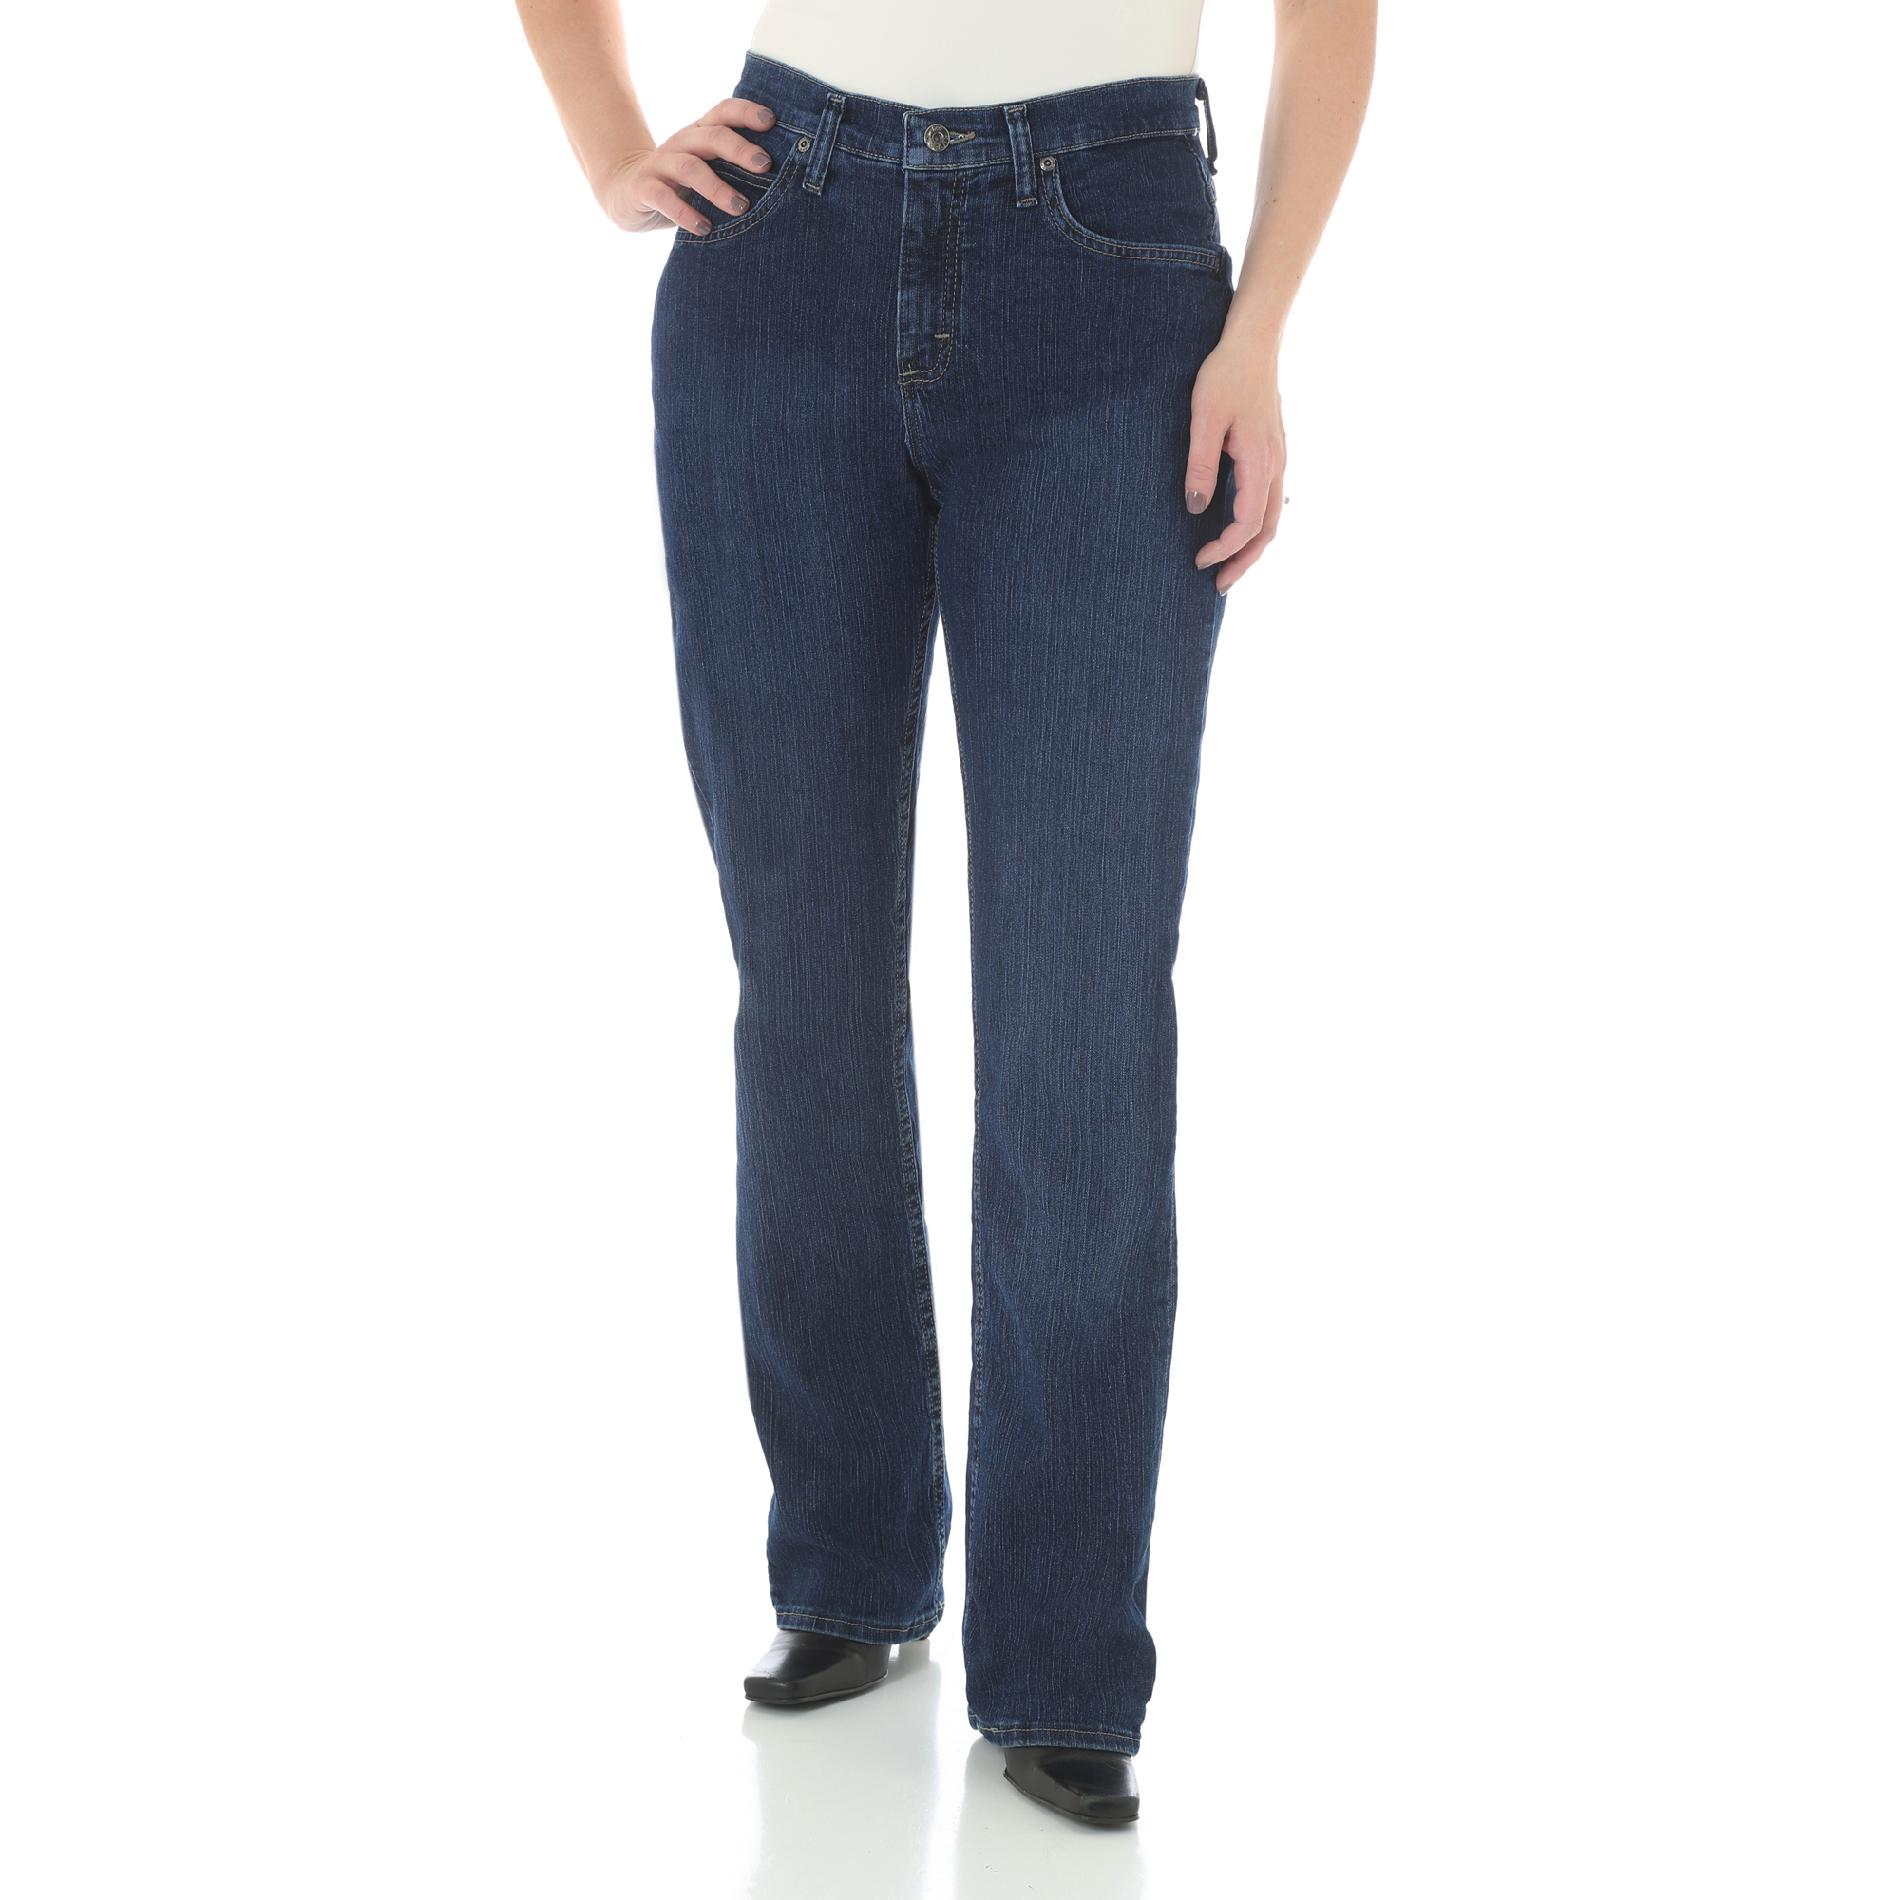 lee rider jeans classic fit